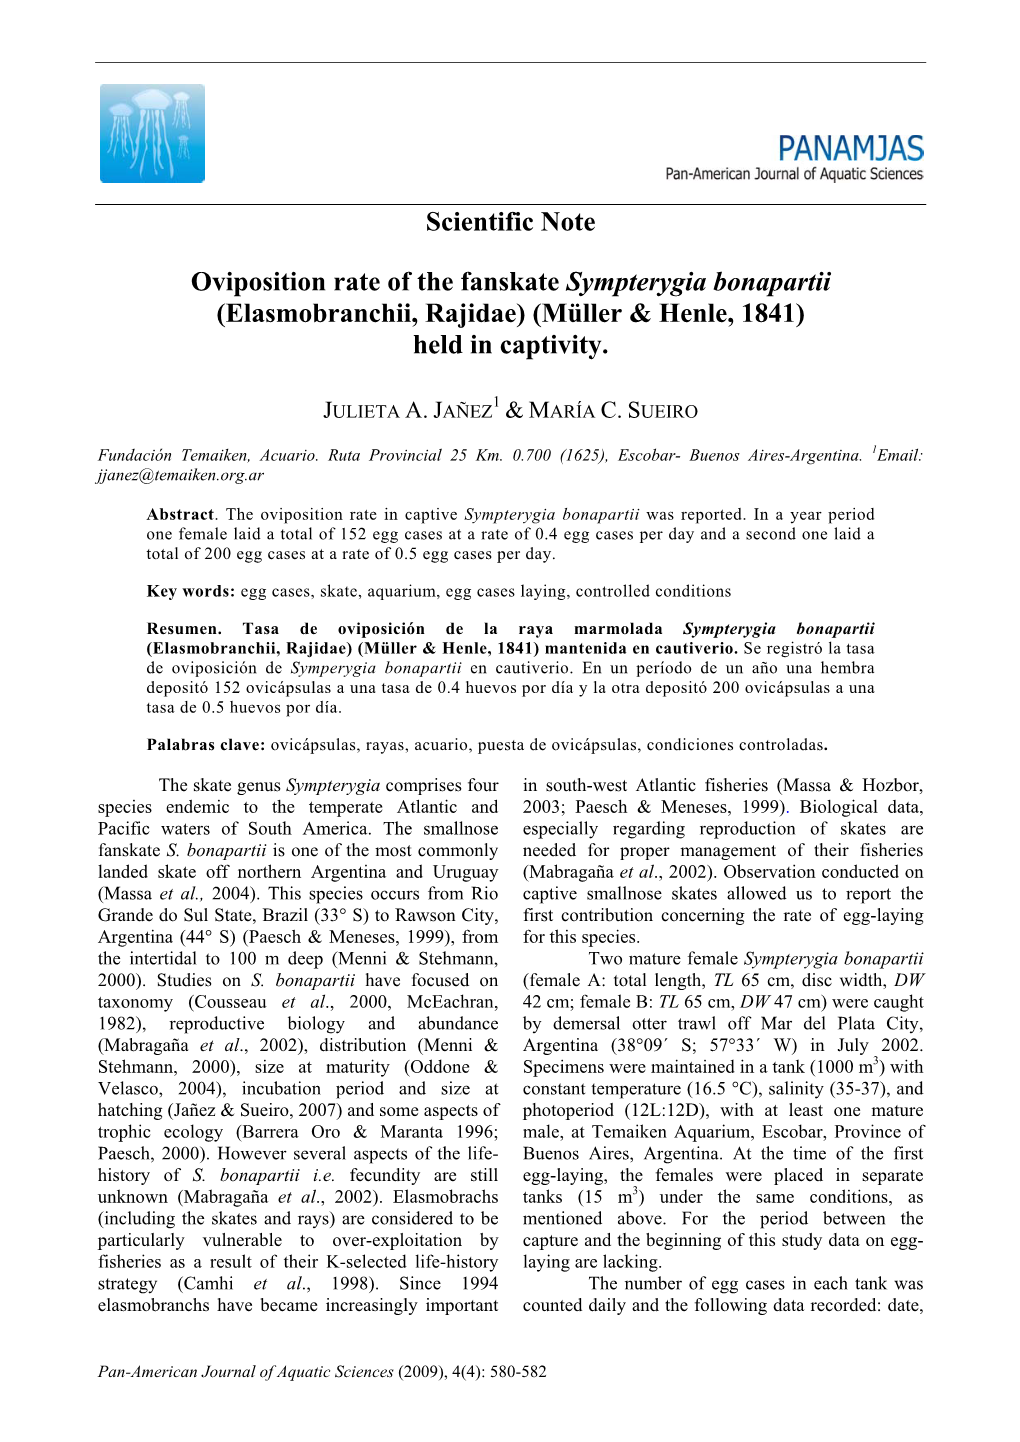 Scientific Note Oviposition Rate of the Fanskate Sympterygia Bonapartii